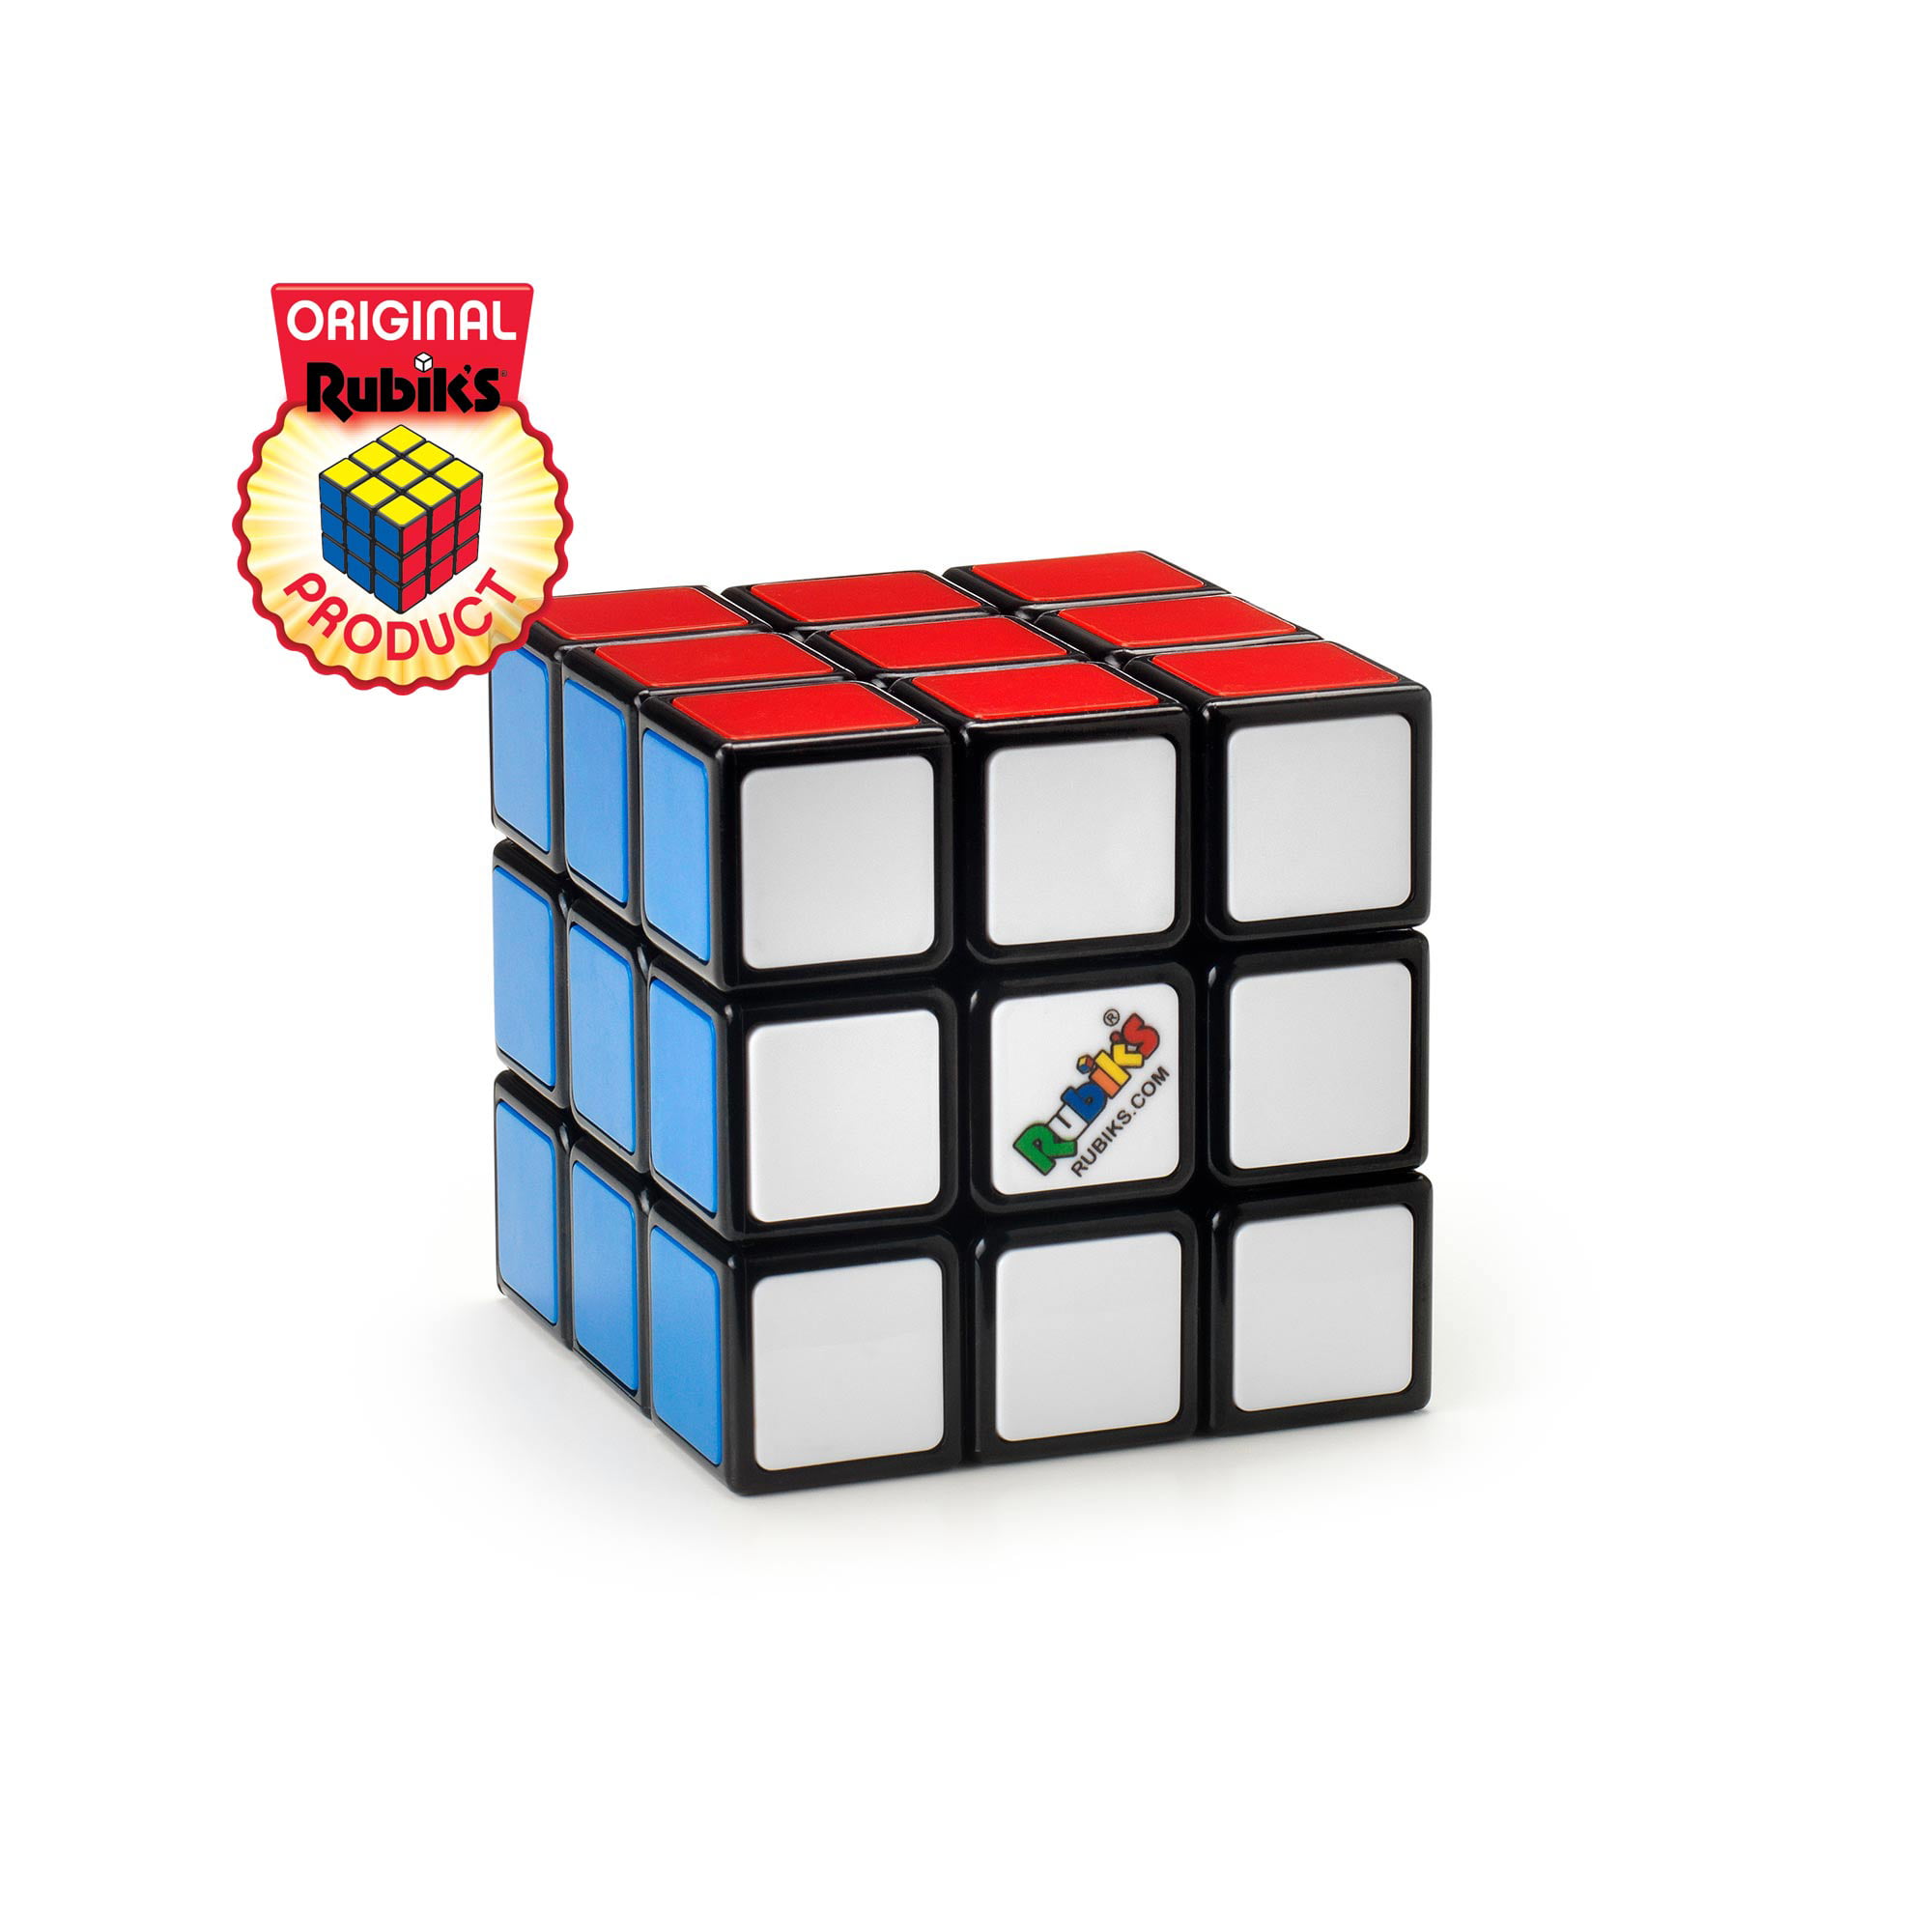 Details about   PREMIUM Professional 1x3x3 Magic Cube Game Puzzle Toy for Kid And Adult ORIGINAL 